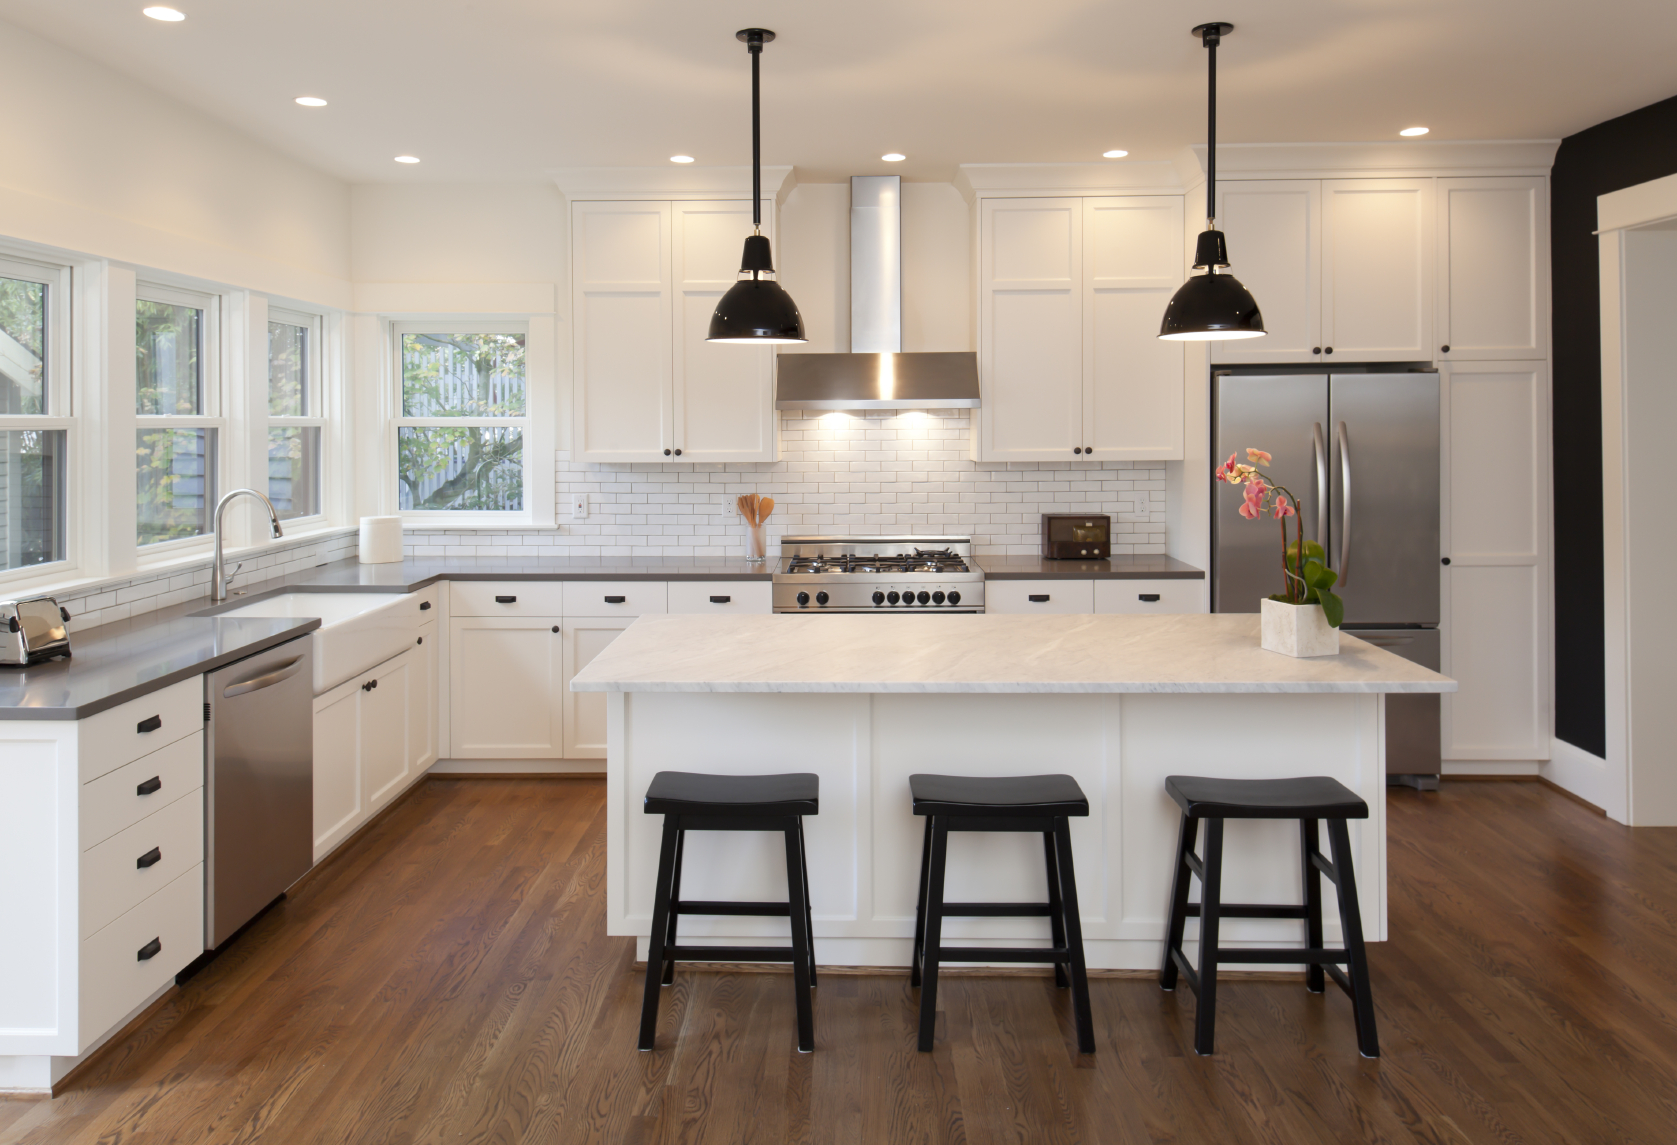 The Do’s and Don’ts of Kitchen Remodeling